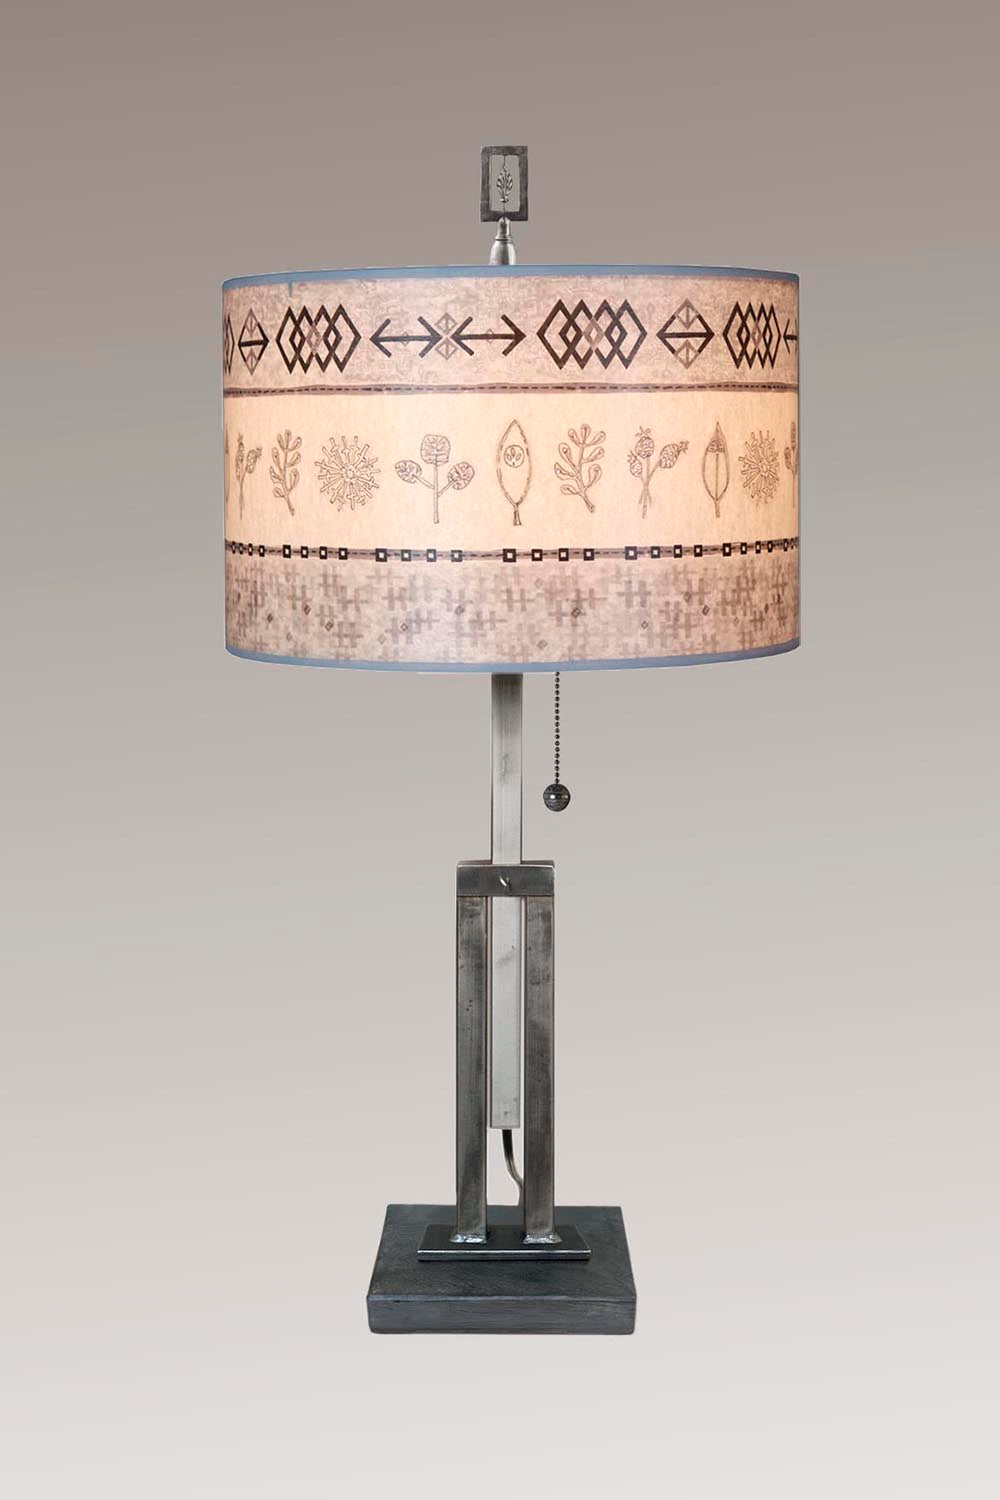 Adjustable-Height Steel Table Lamp with Large Drum Shade in Wovens & Spring in Mist